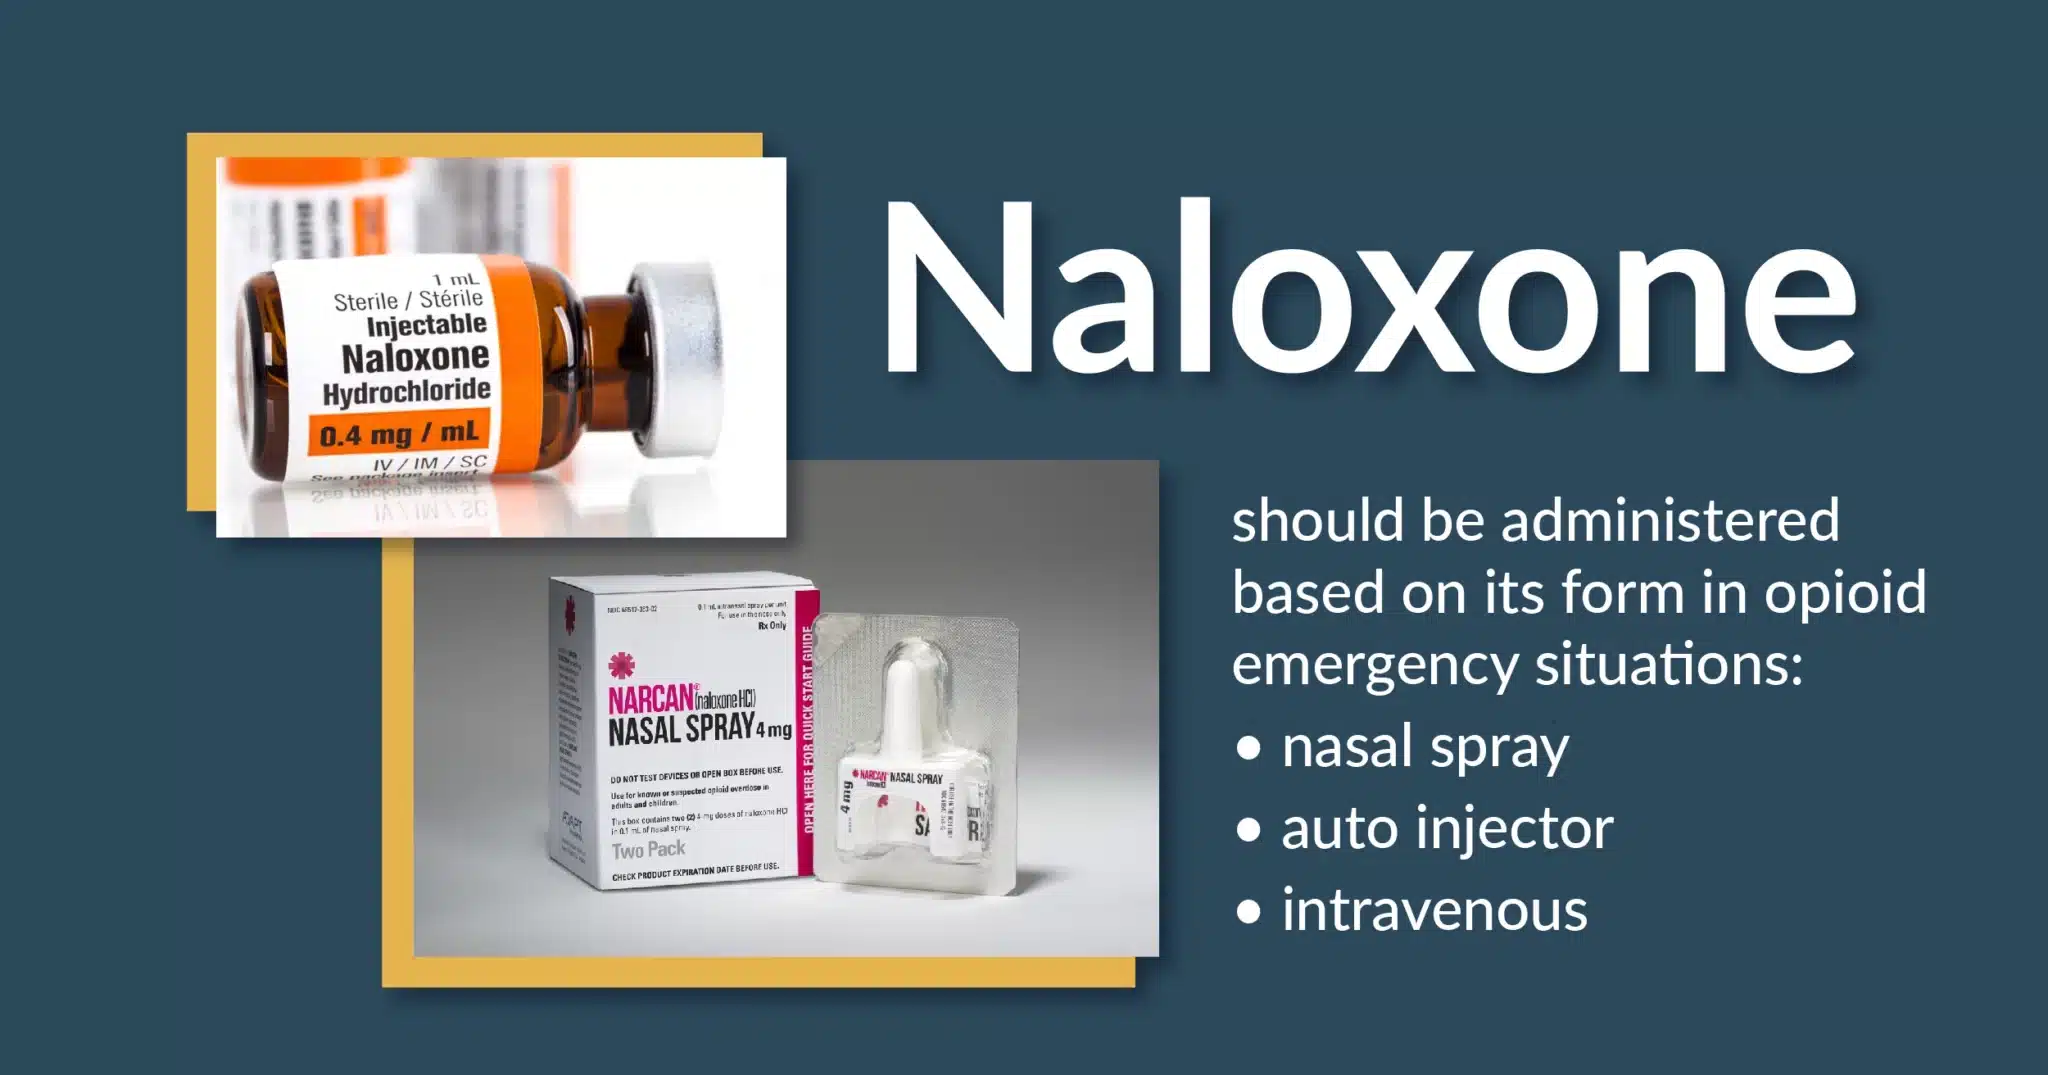 Images of two forms of Naloxone. Text explains Naloxone should be administered in cases of an opioid overdose emergency